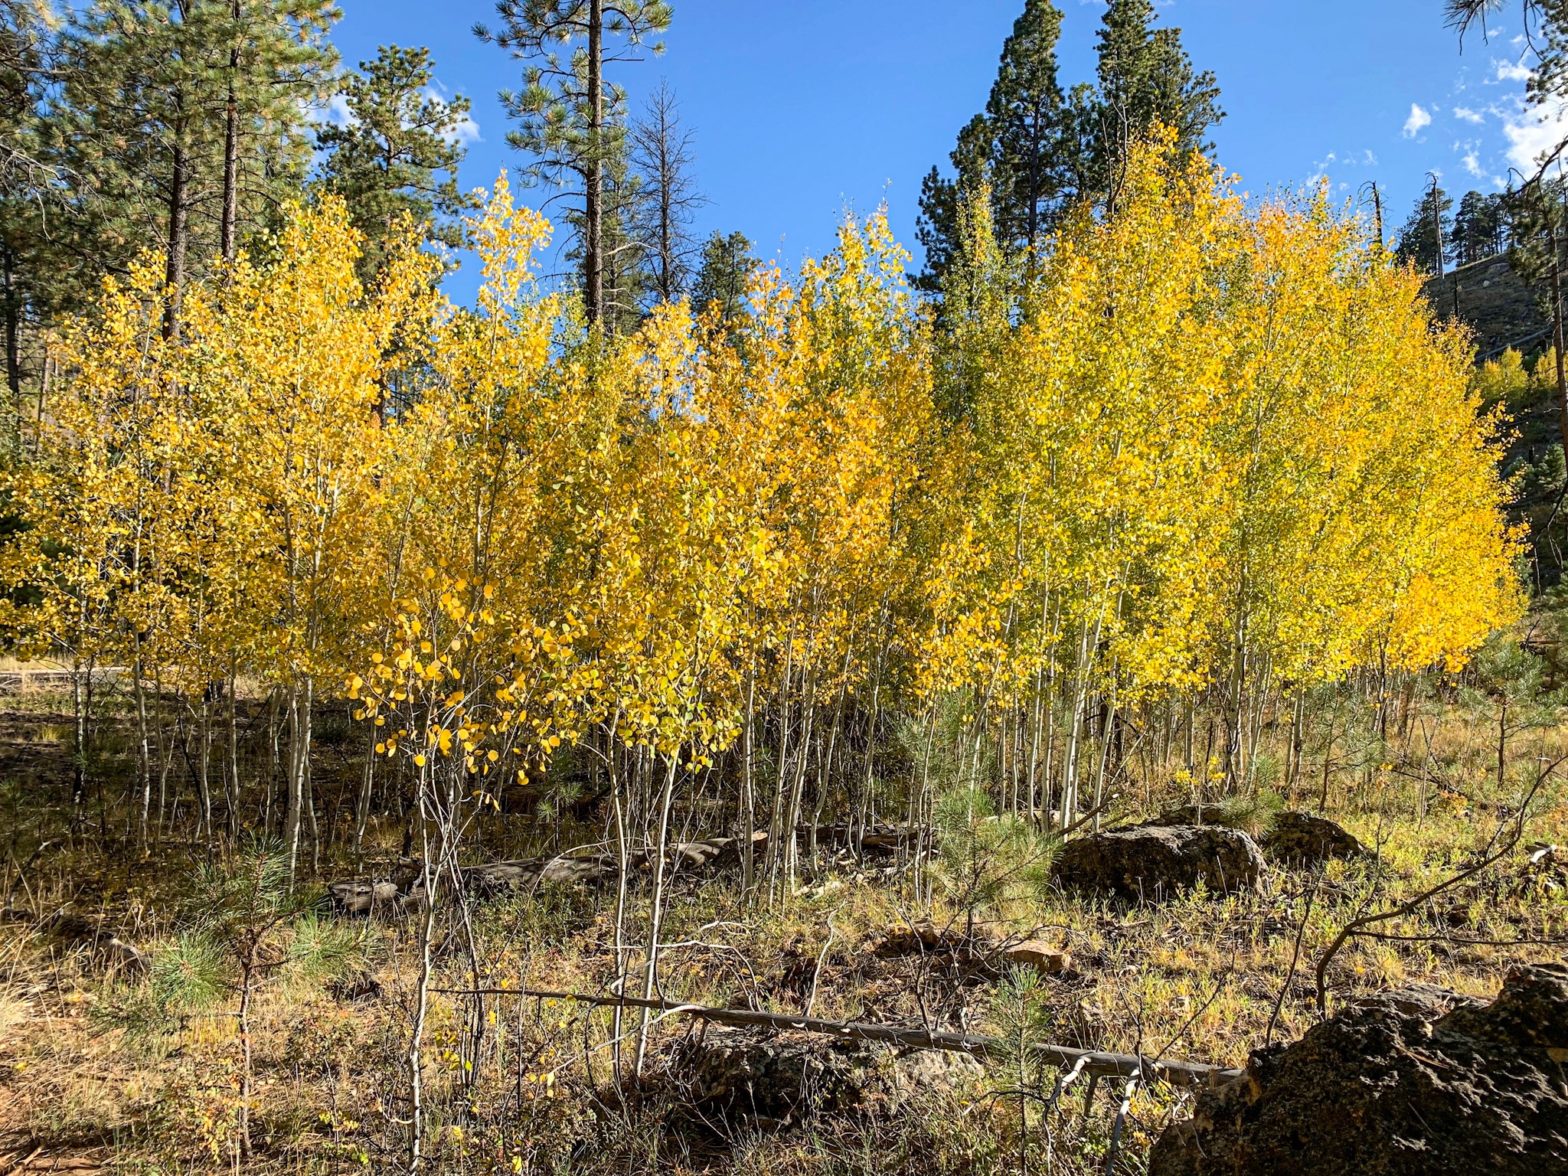 Golden young aspen trees stand beside the Arizona Trail under a brilliant blue sky